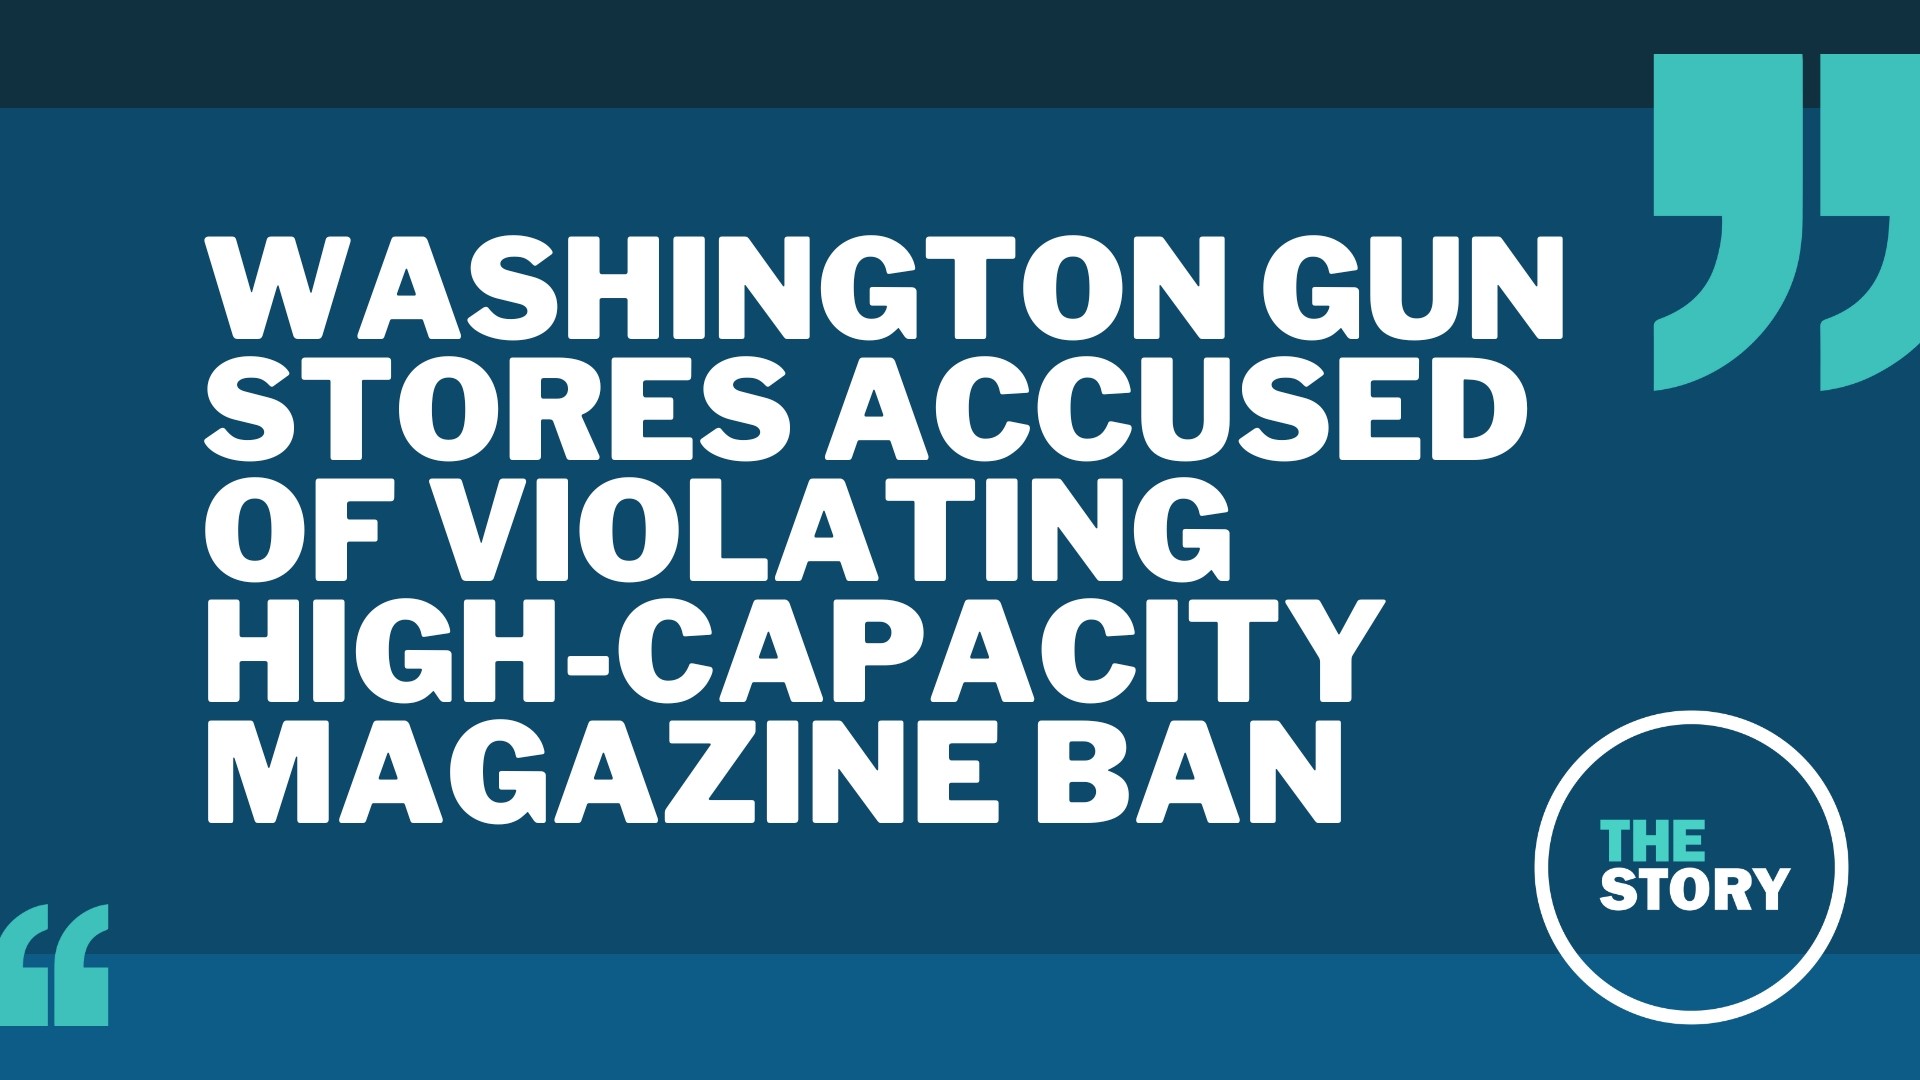 Washington previously banned high-capacity magazines. The state Attorney General’s office says some stores have flouted those rules.